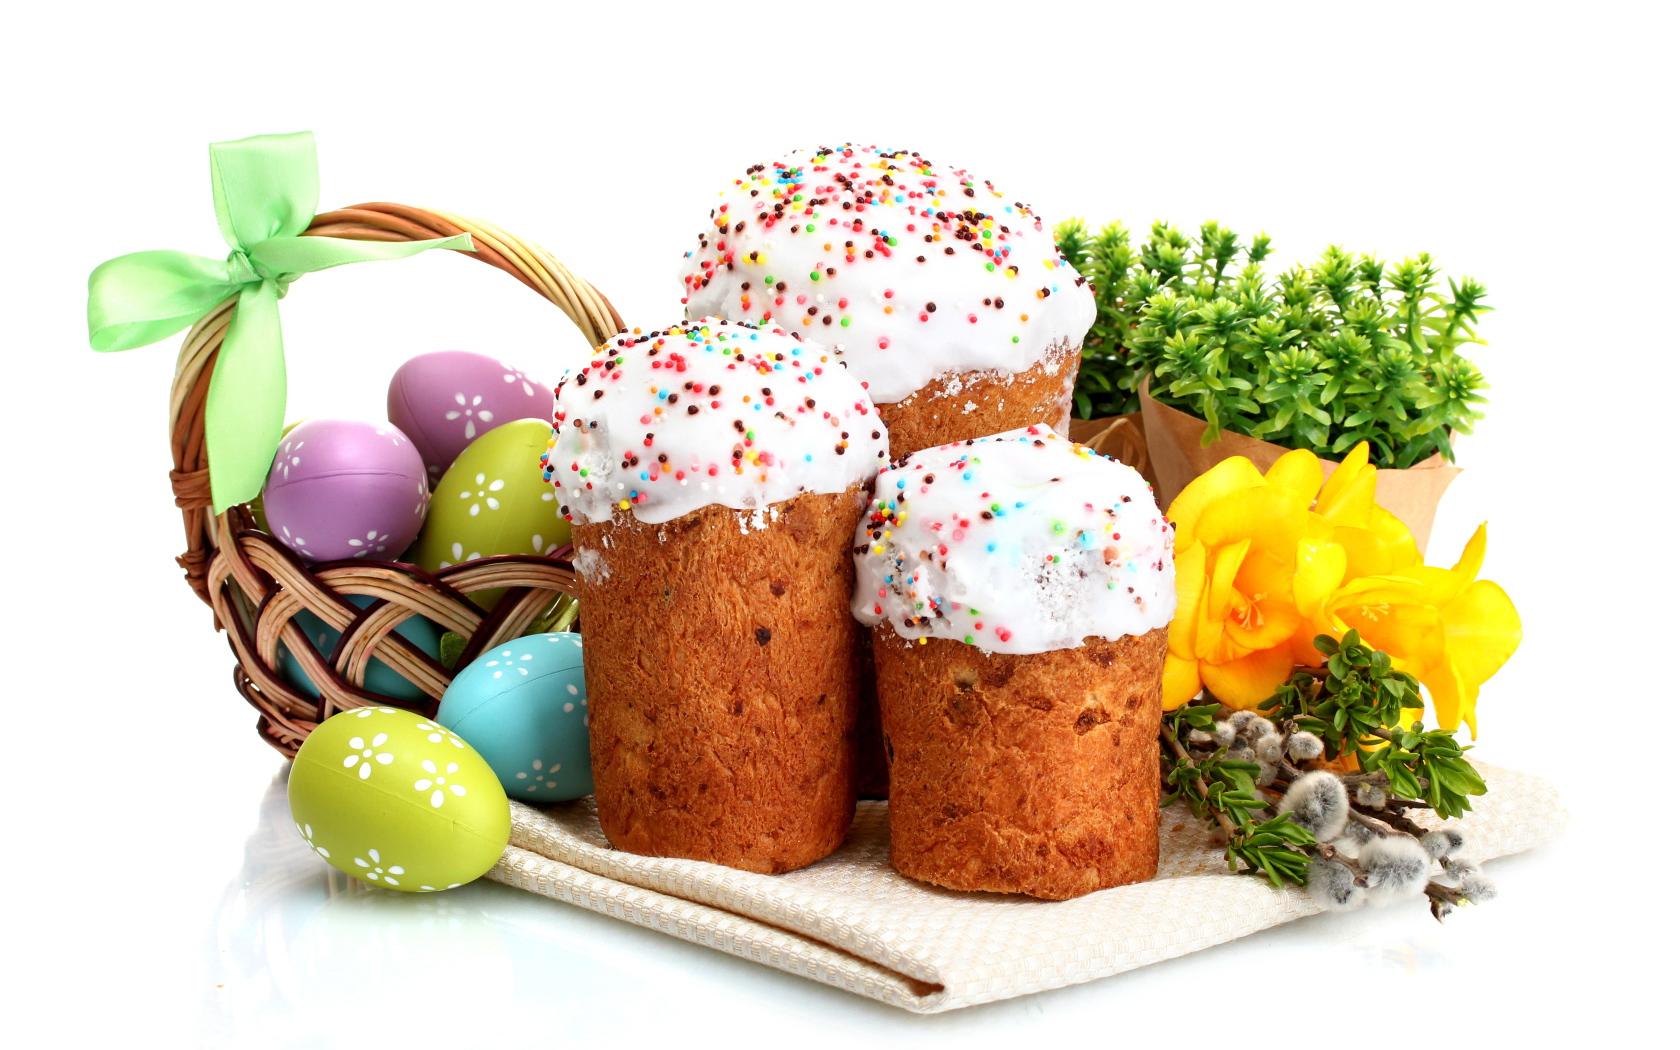 Three sweet cakes on white background with flowers and painted eggs for the holiday Easter